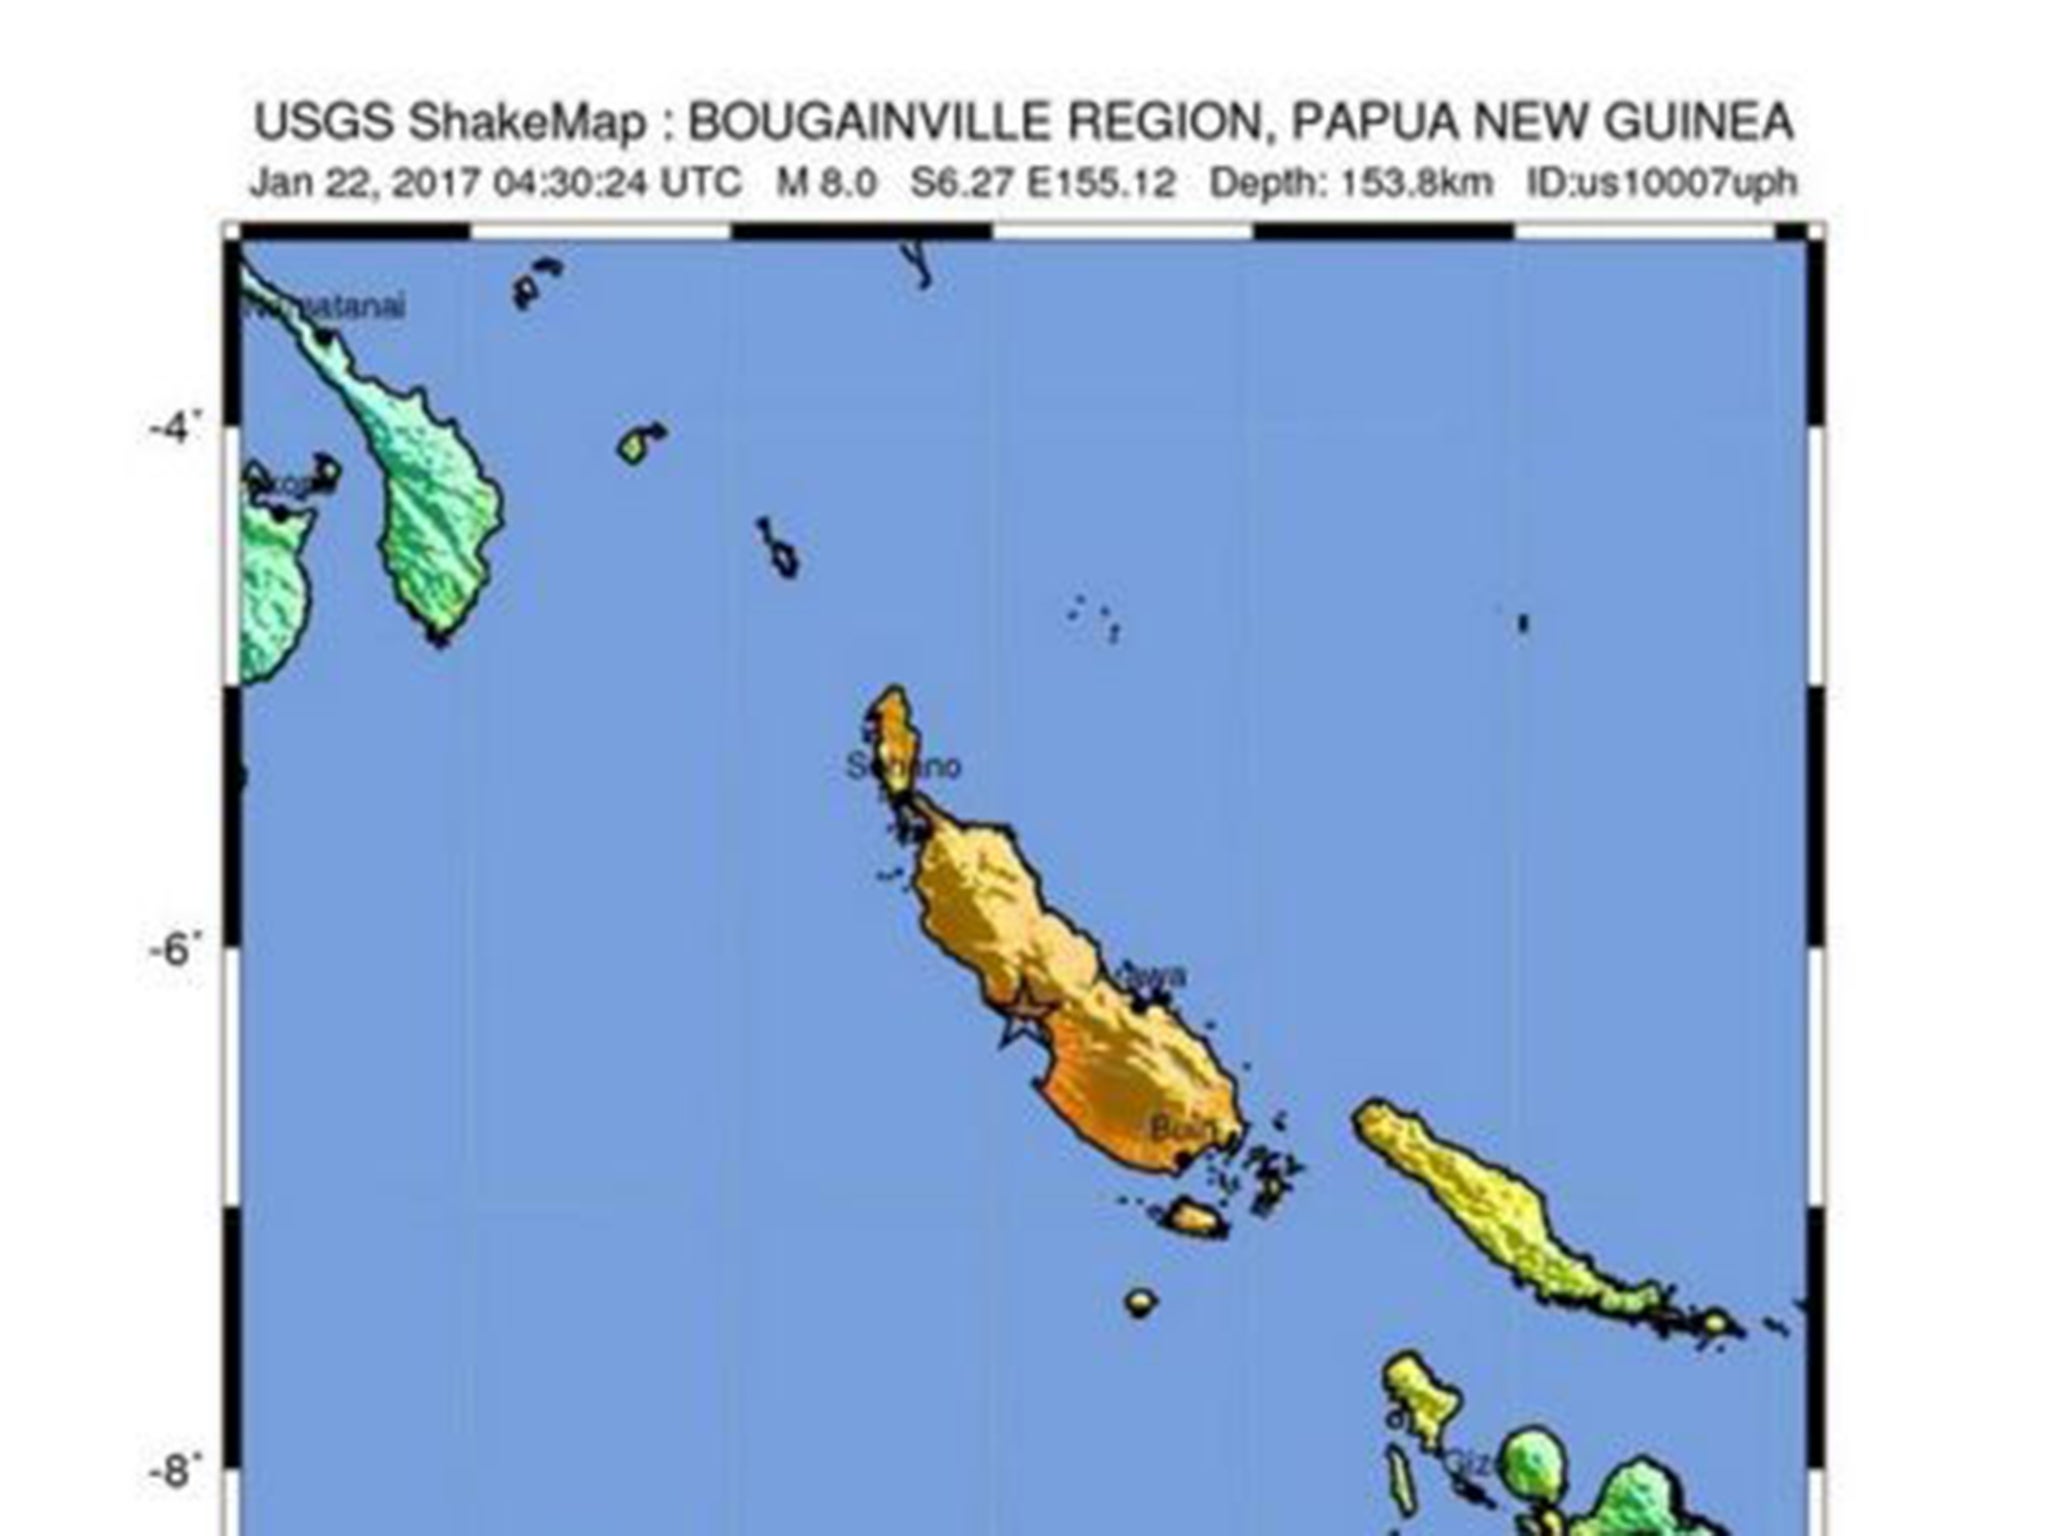 The earthquake struck the island of Bourgainville at 4:30am local time